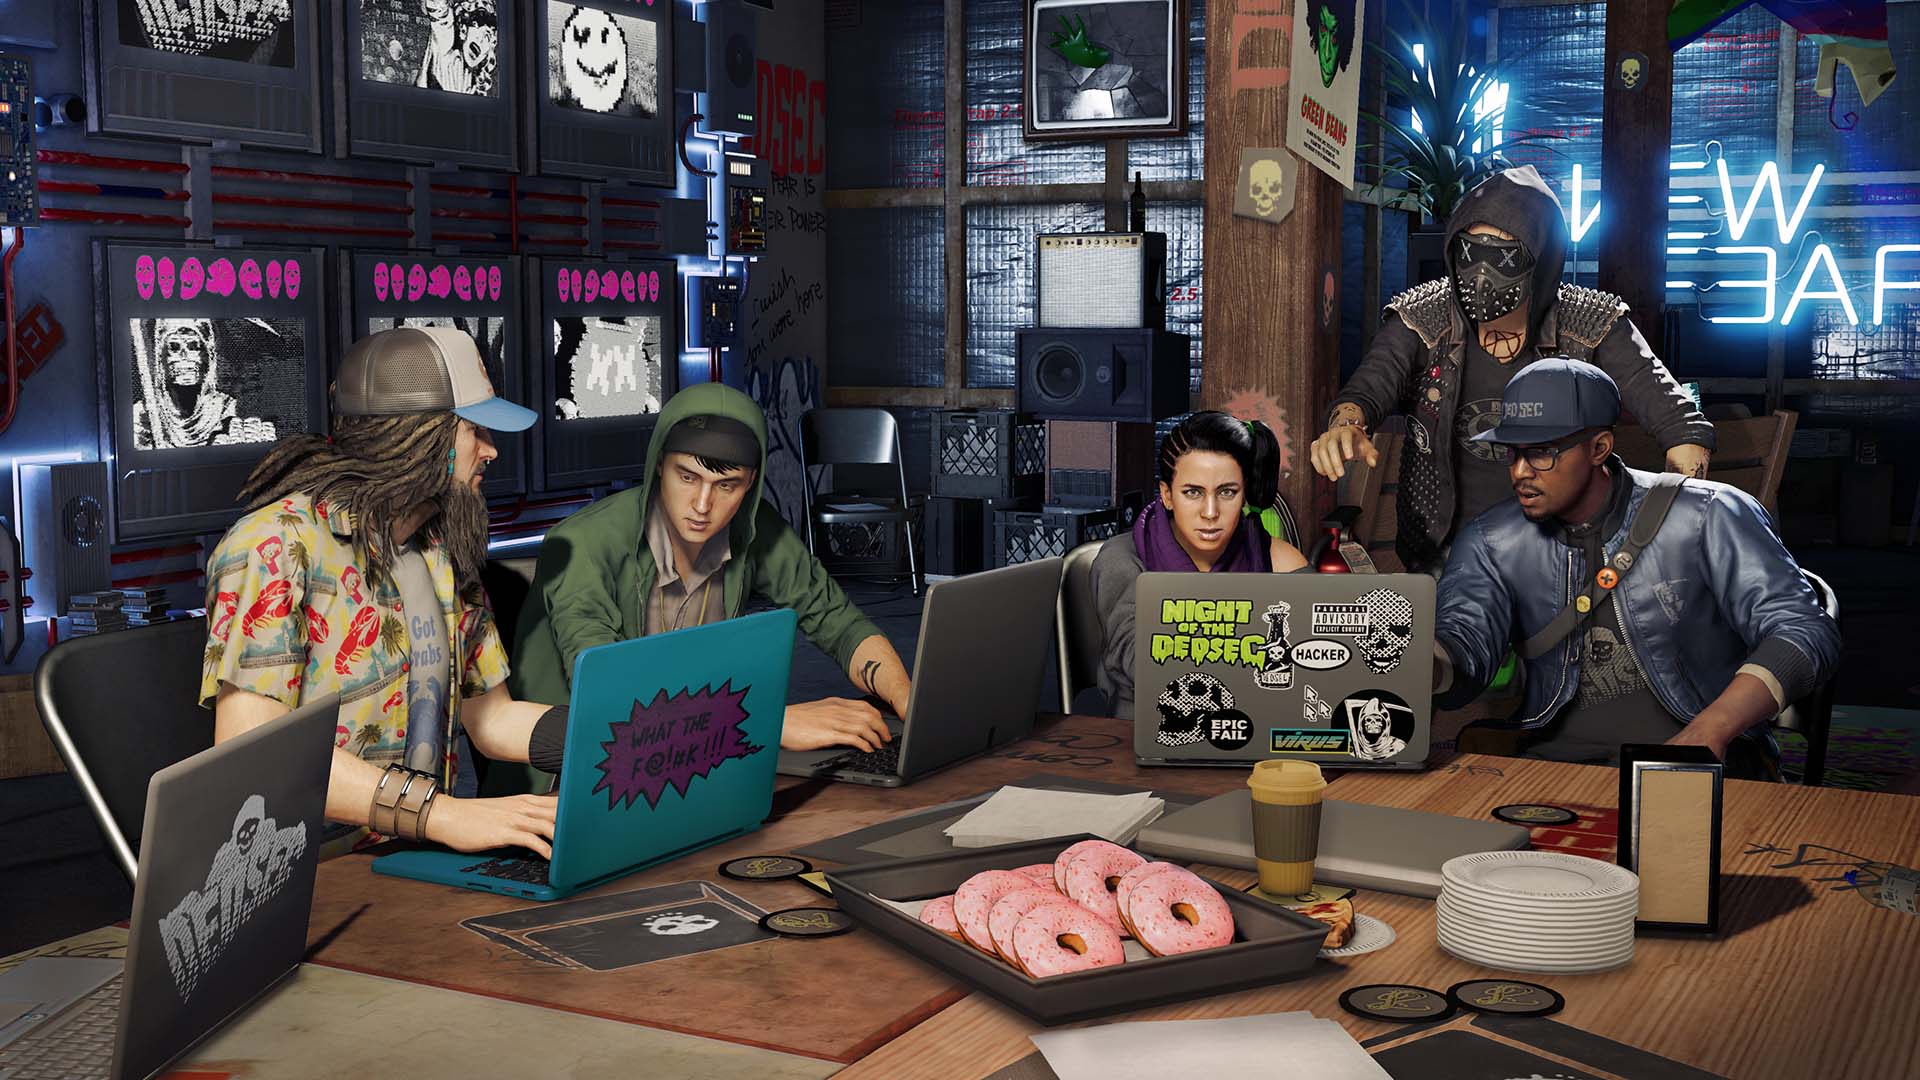 Watch Dogs 2 Story Trailer